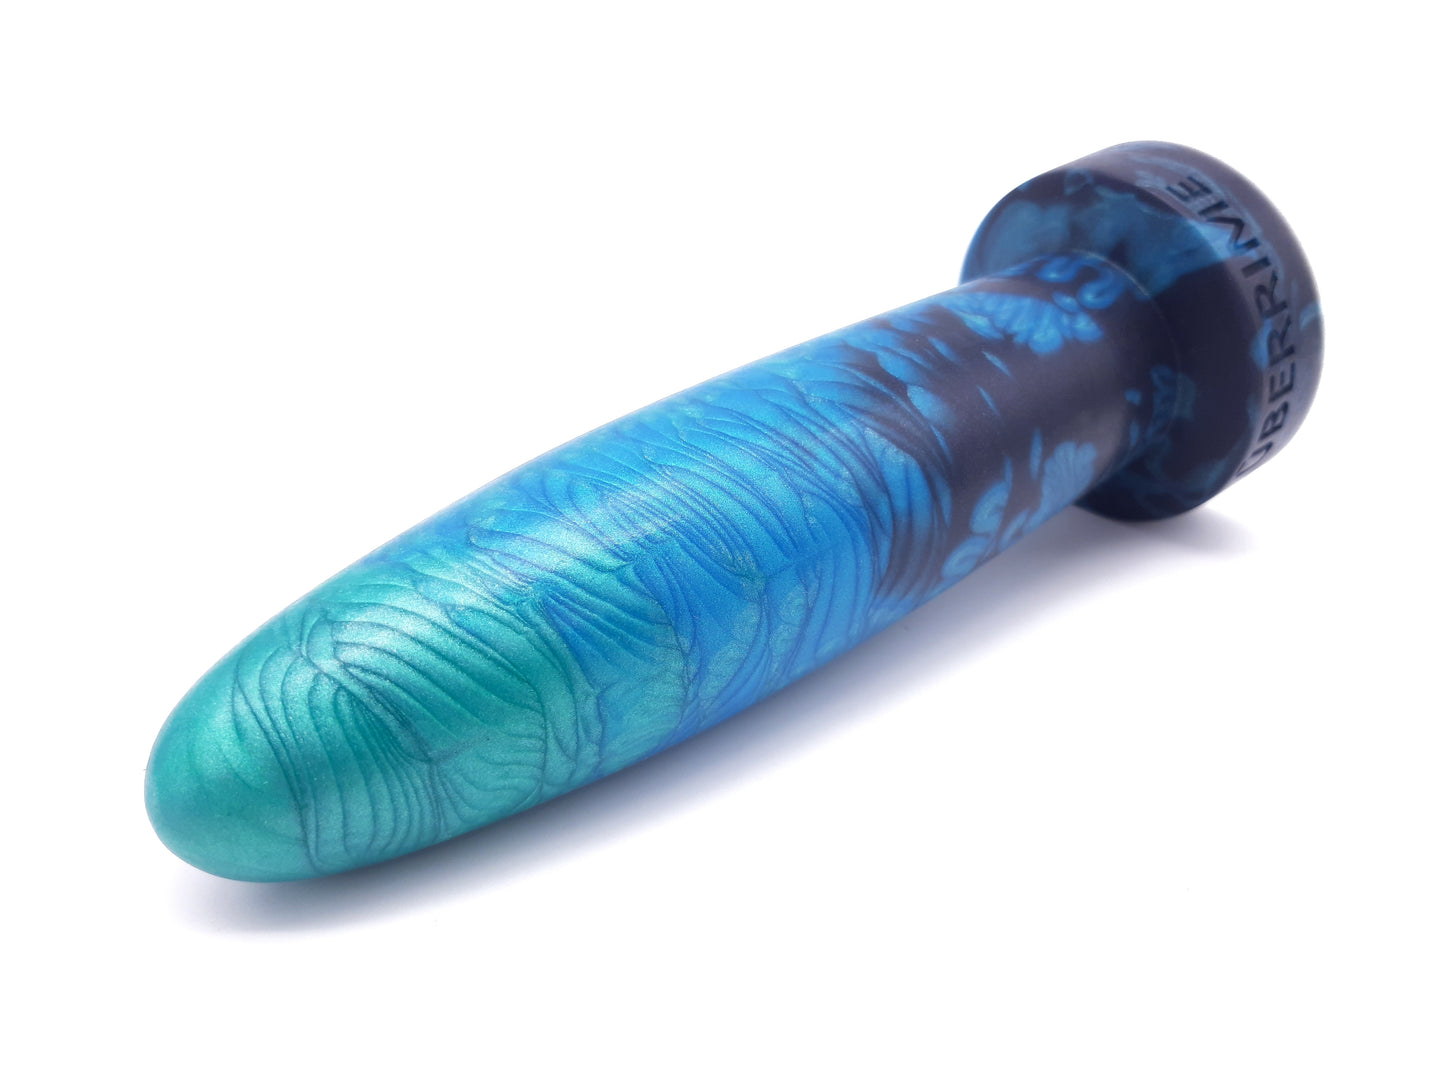 The Elements® #1 Dildo - Standard Size